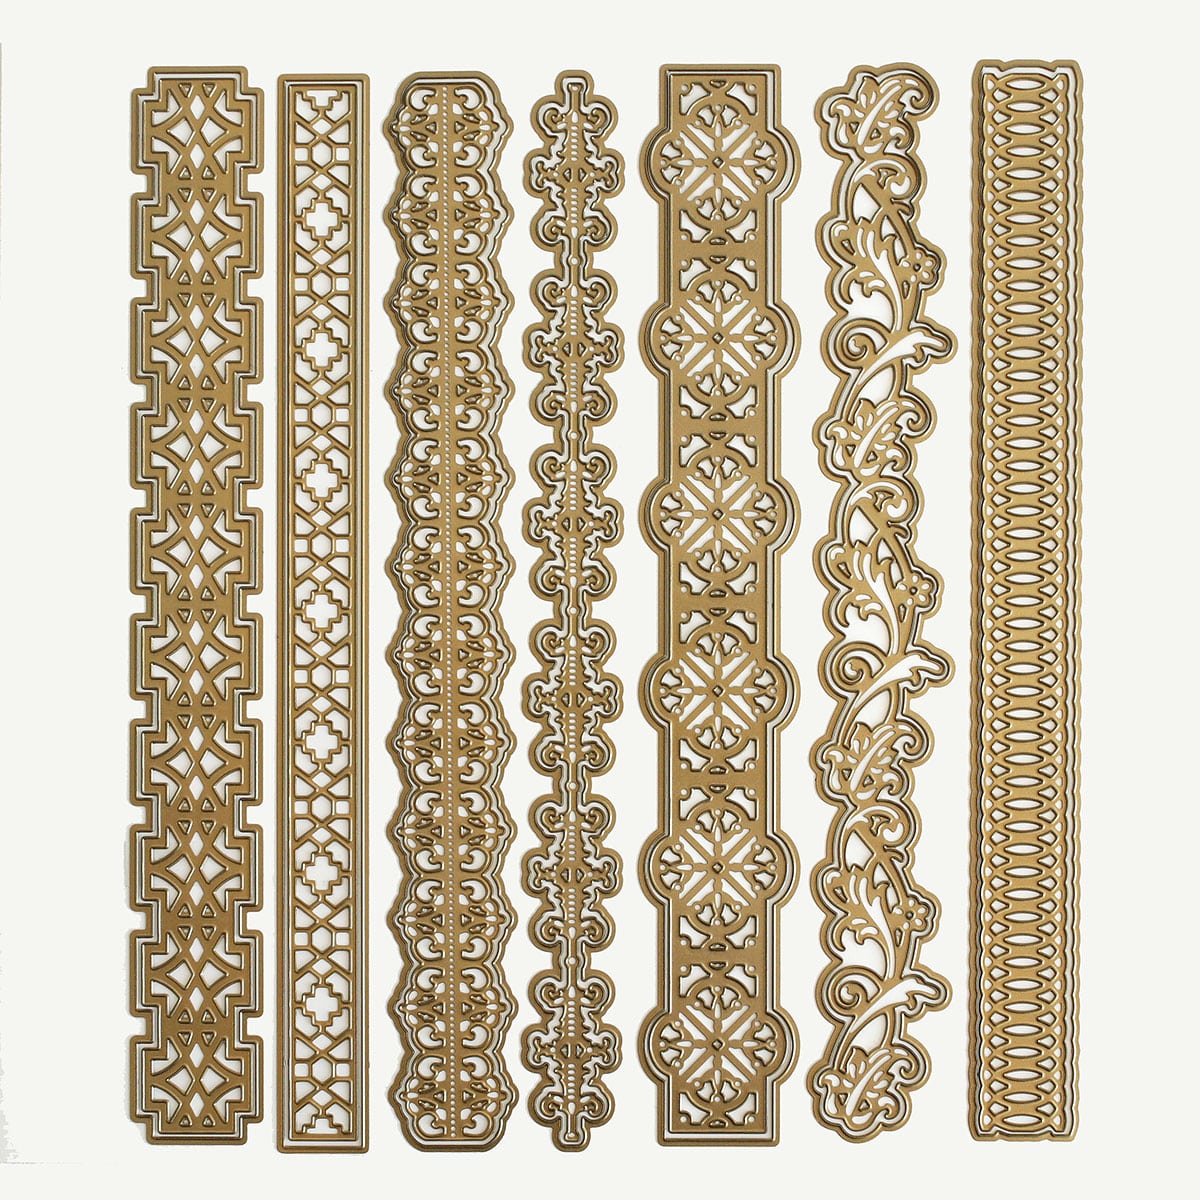 a set of decorative gold trimmings on a white background.